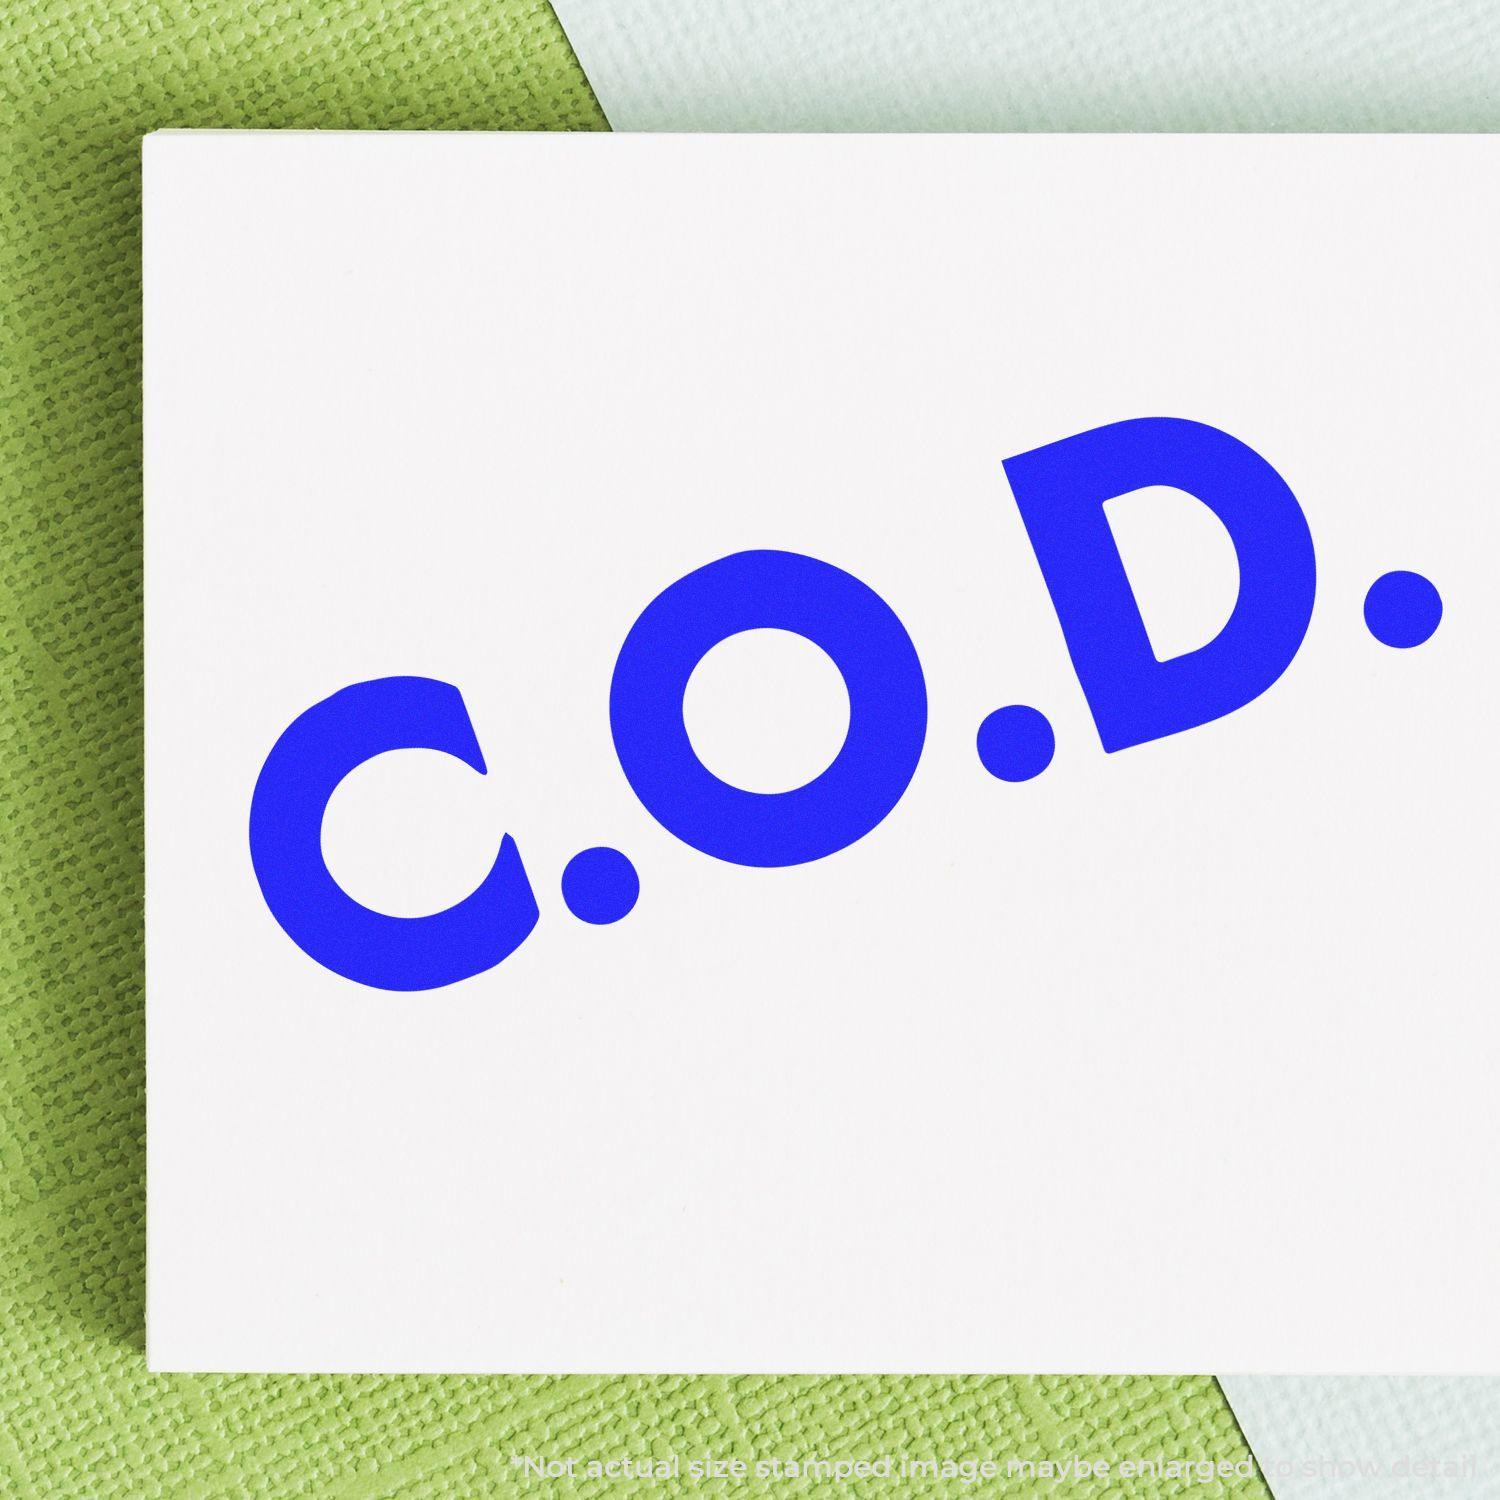 A stock office rubber stamp with a stamped image showing how the text "C.O.D." in bold font is displayed after stamping.